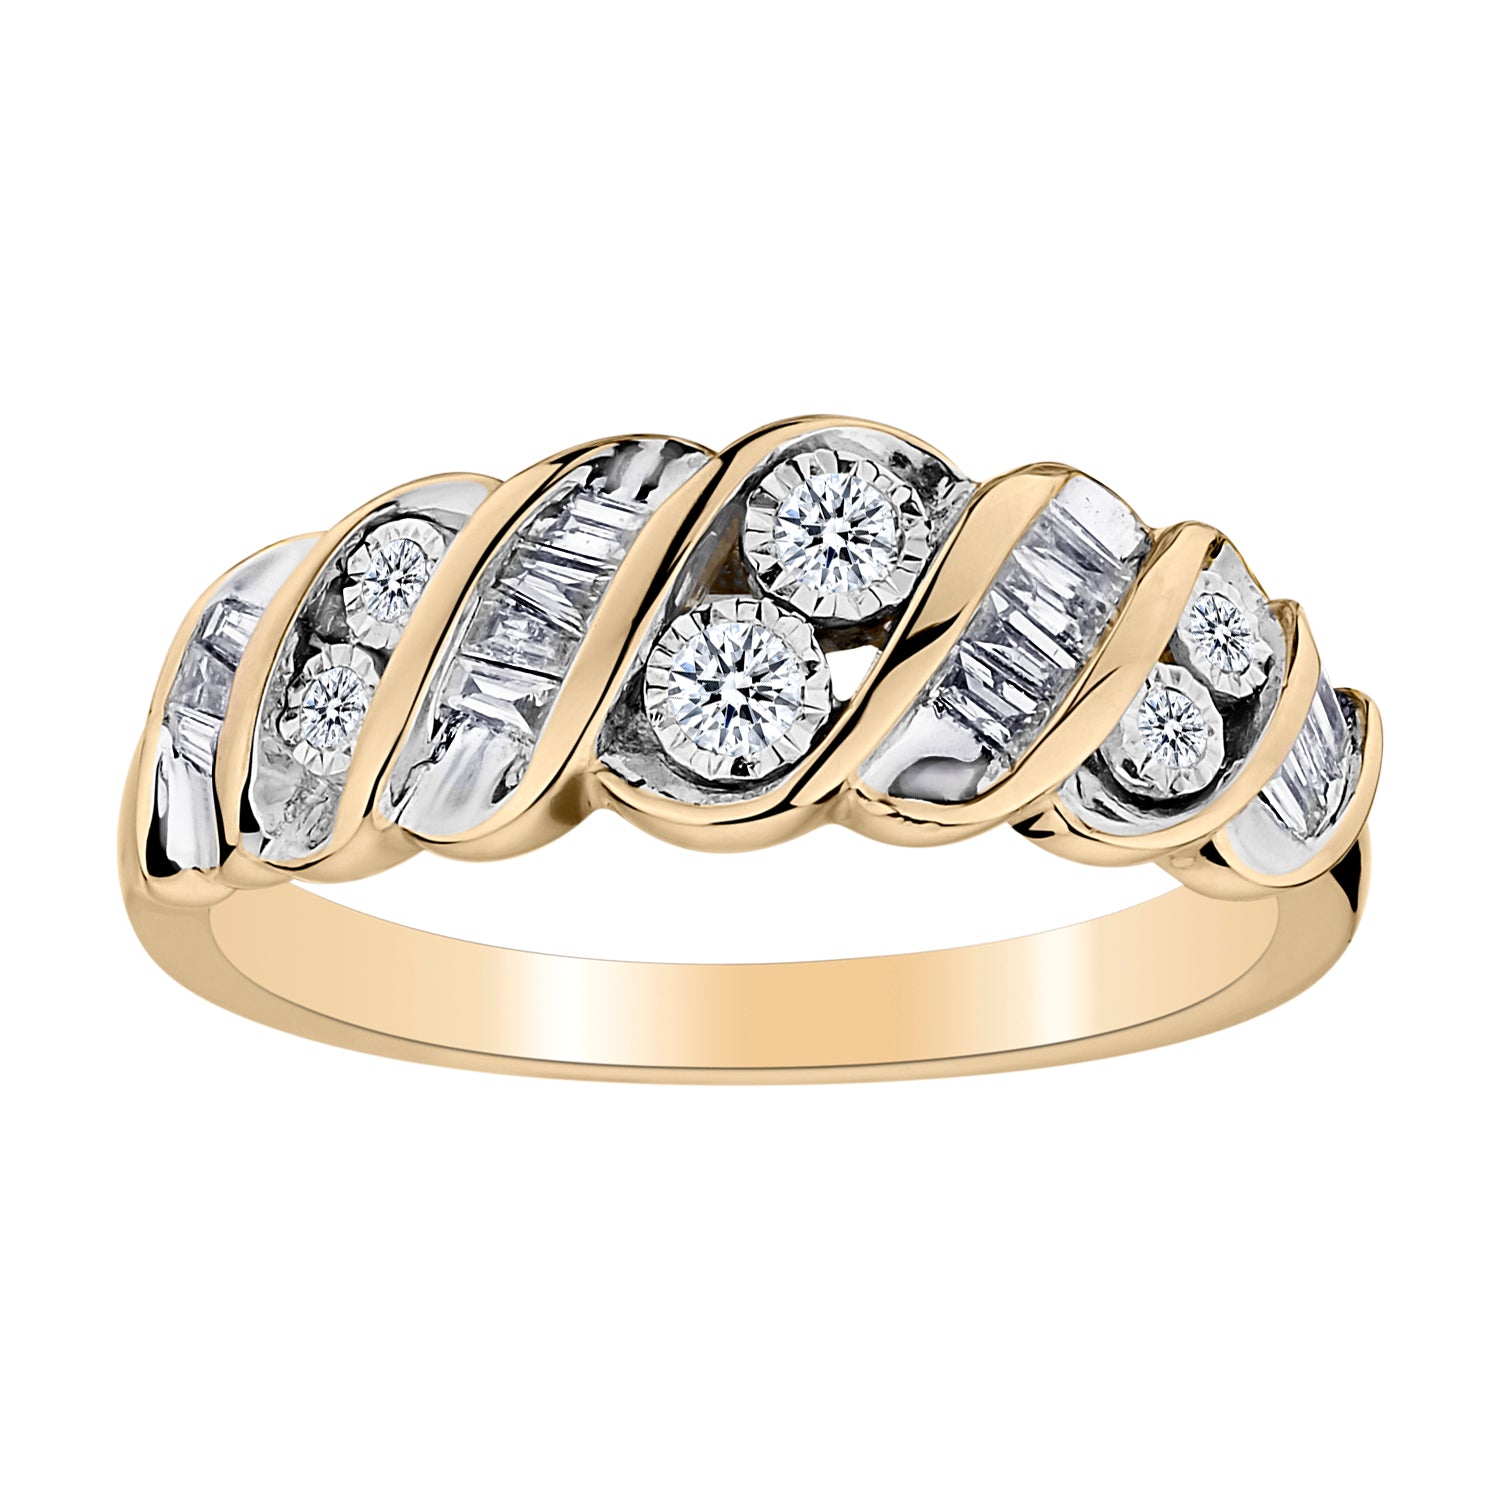 .33 Carat Diamond Ring,  10kt Yellow Gold. Fashion Rings. Griffin Jewellery Designs